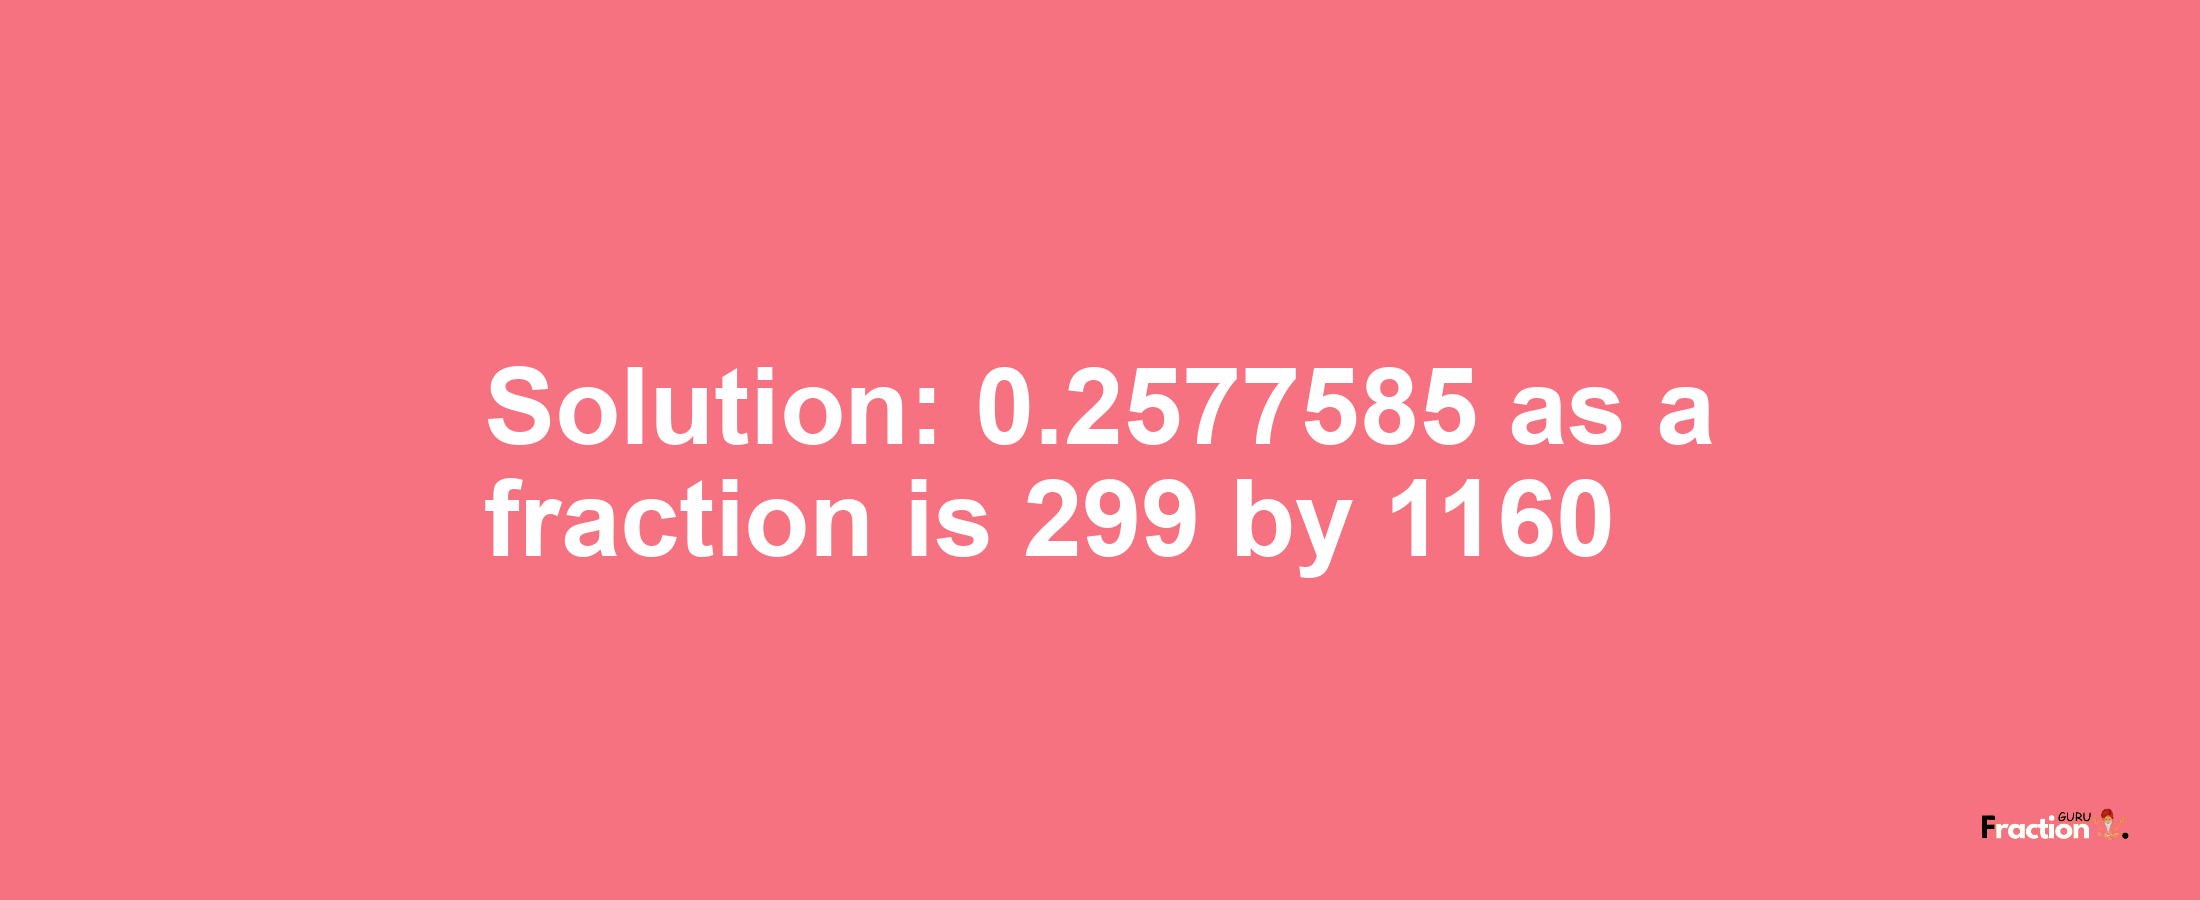 Solution:0.2577585 as a fraction is 299/1160